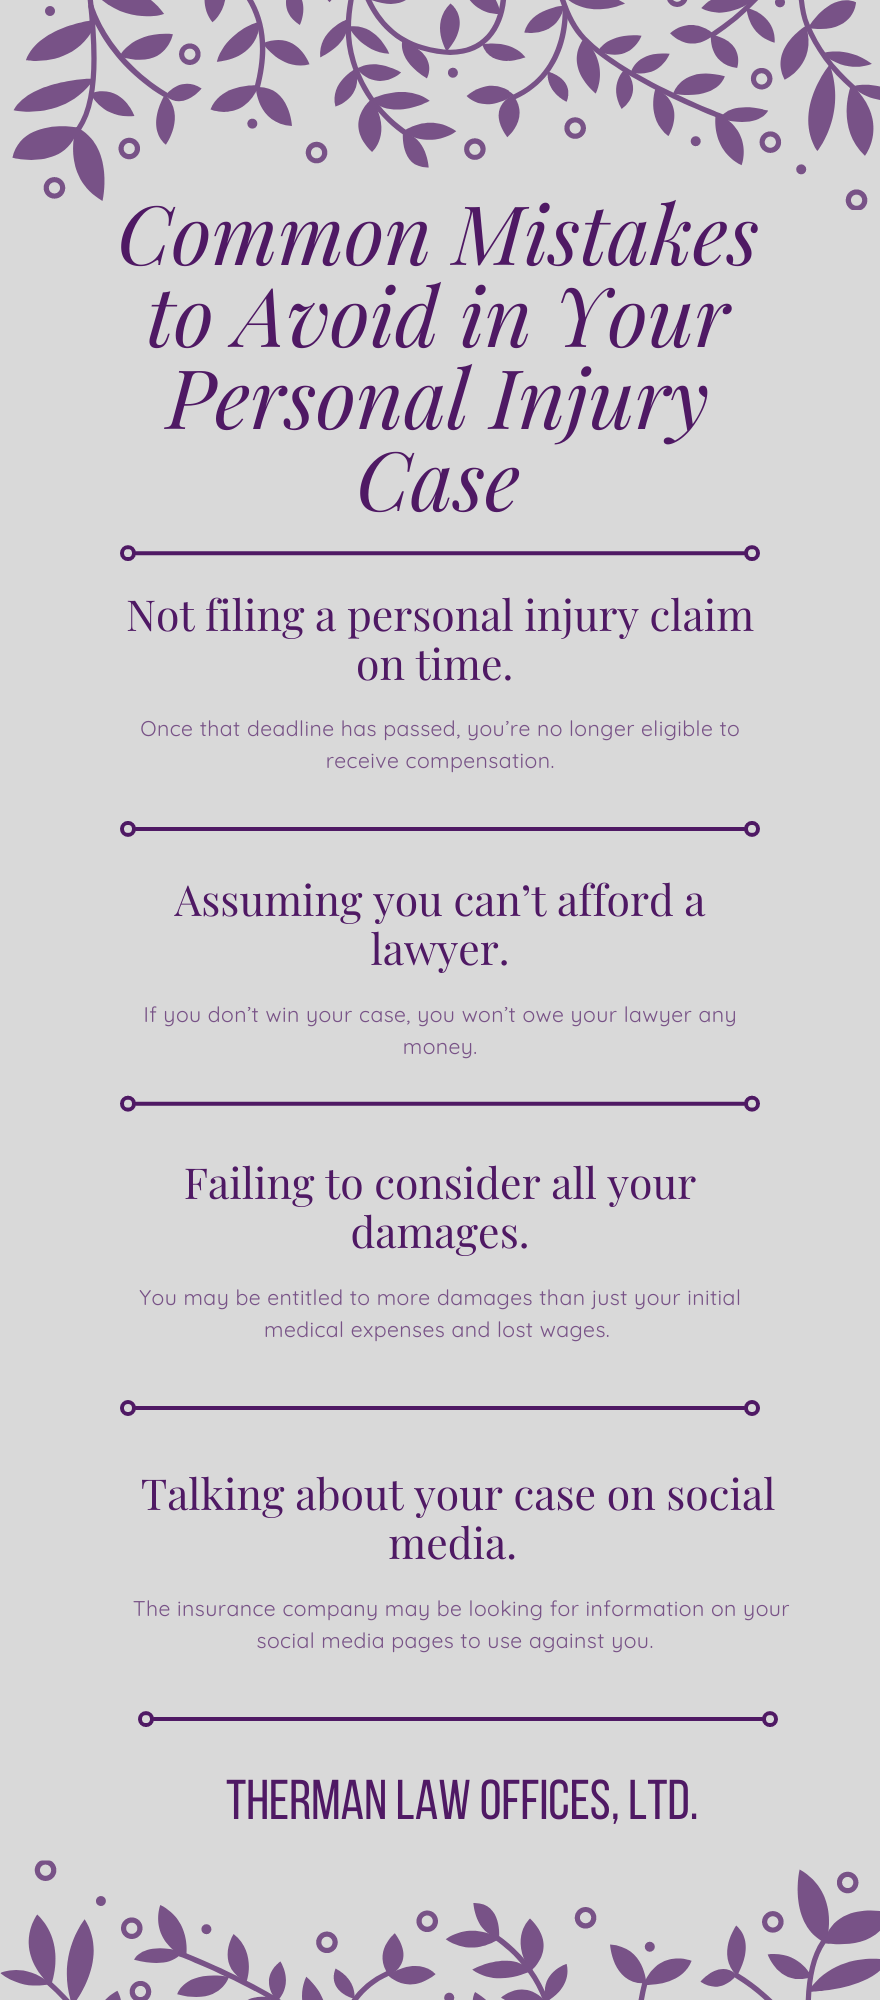 Common Mistakes to Avoid in Your Personal Injury Case Infographic